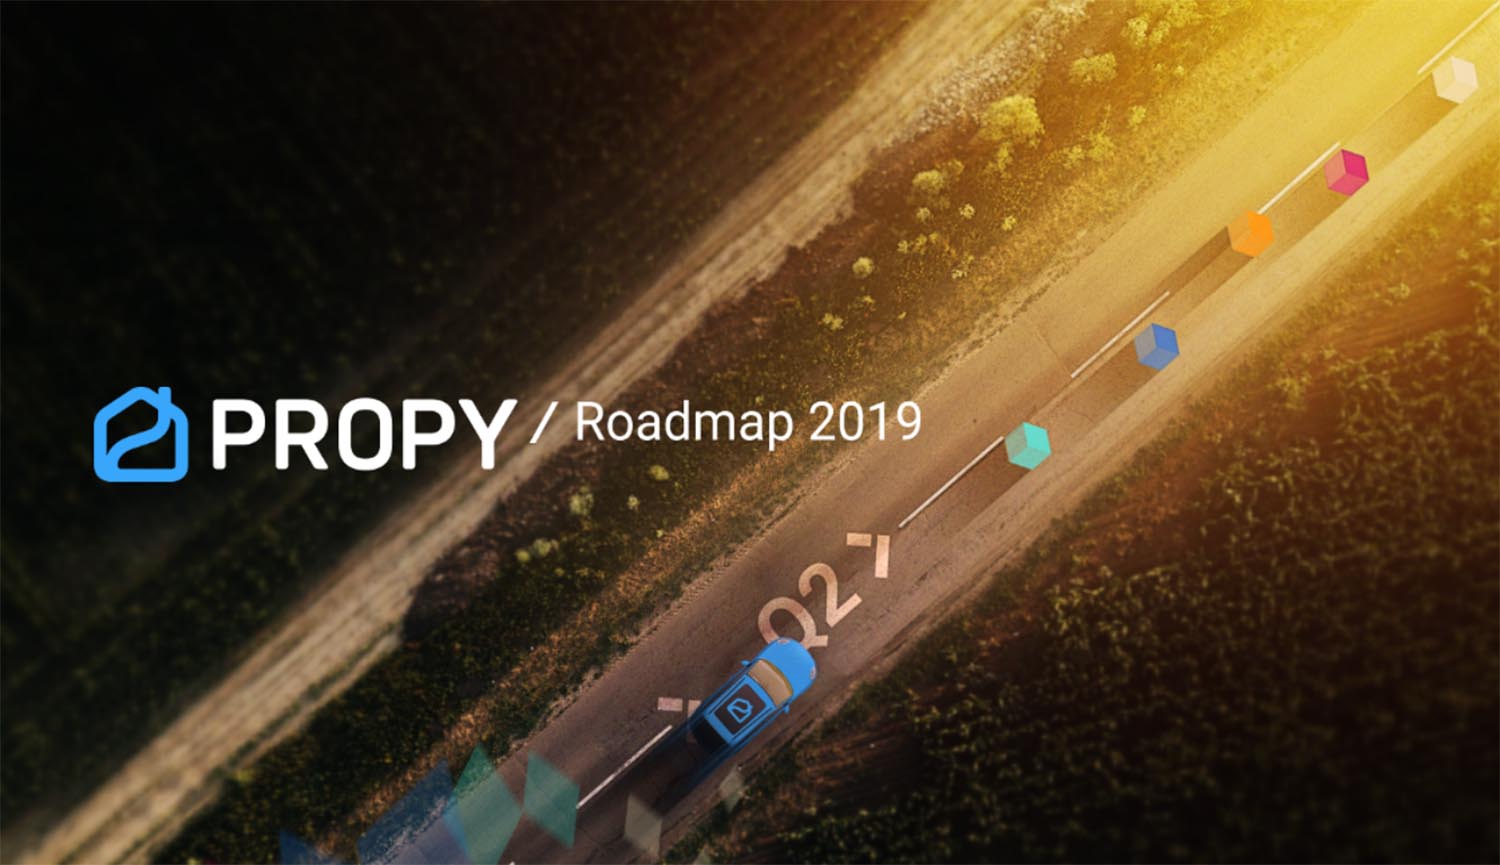 Propy 2019 Roadmap: A Year of Growth